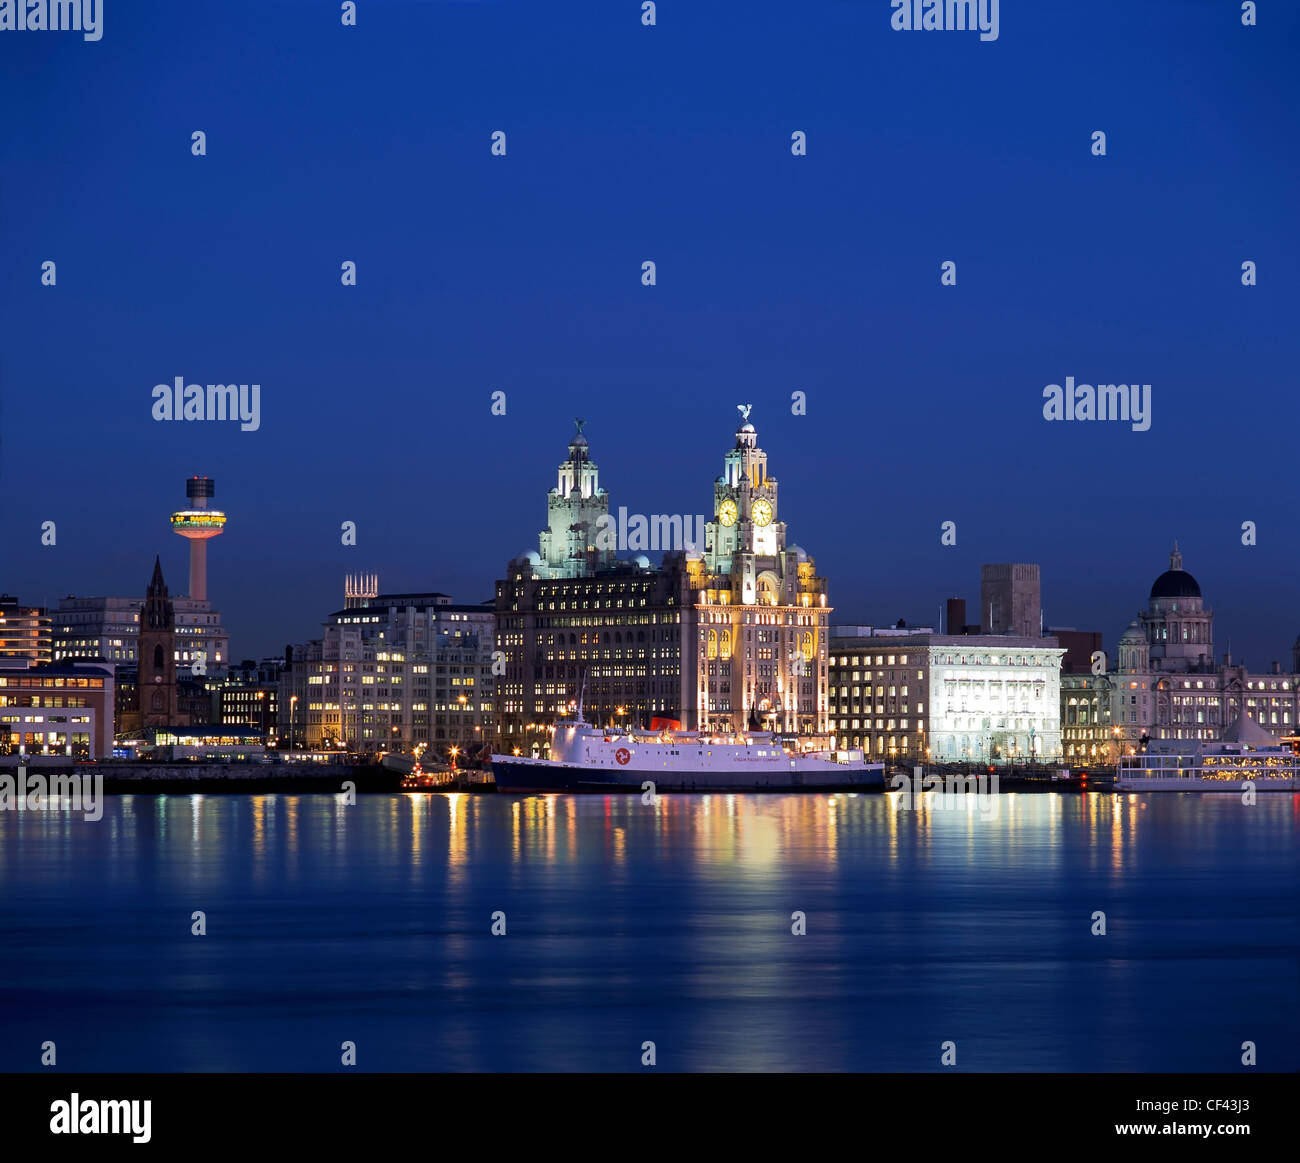 View across the River Mersey of the famous Liverpool waterfront at Stock Photo ...